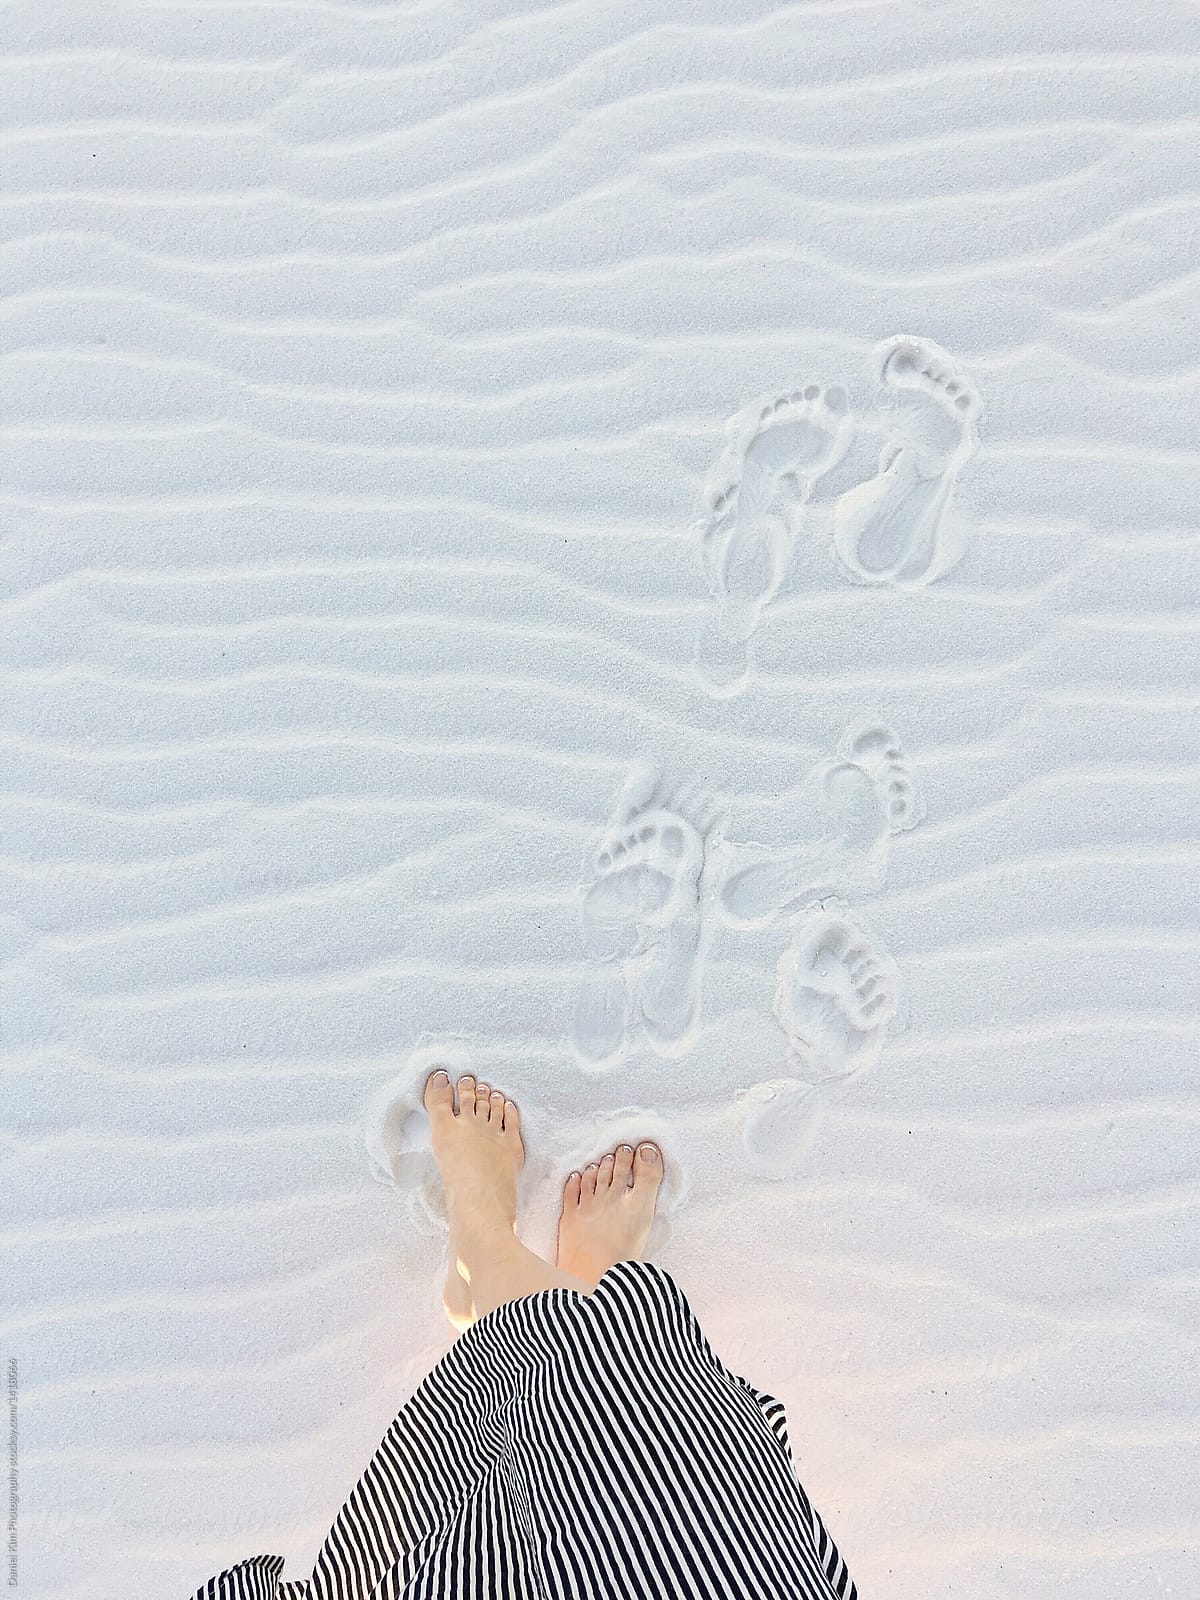 Top view of foot prints in soft white sand